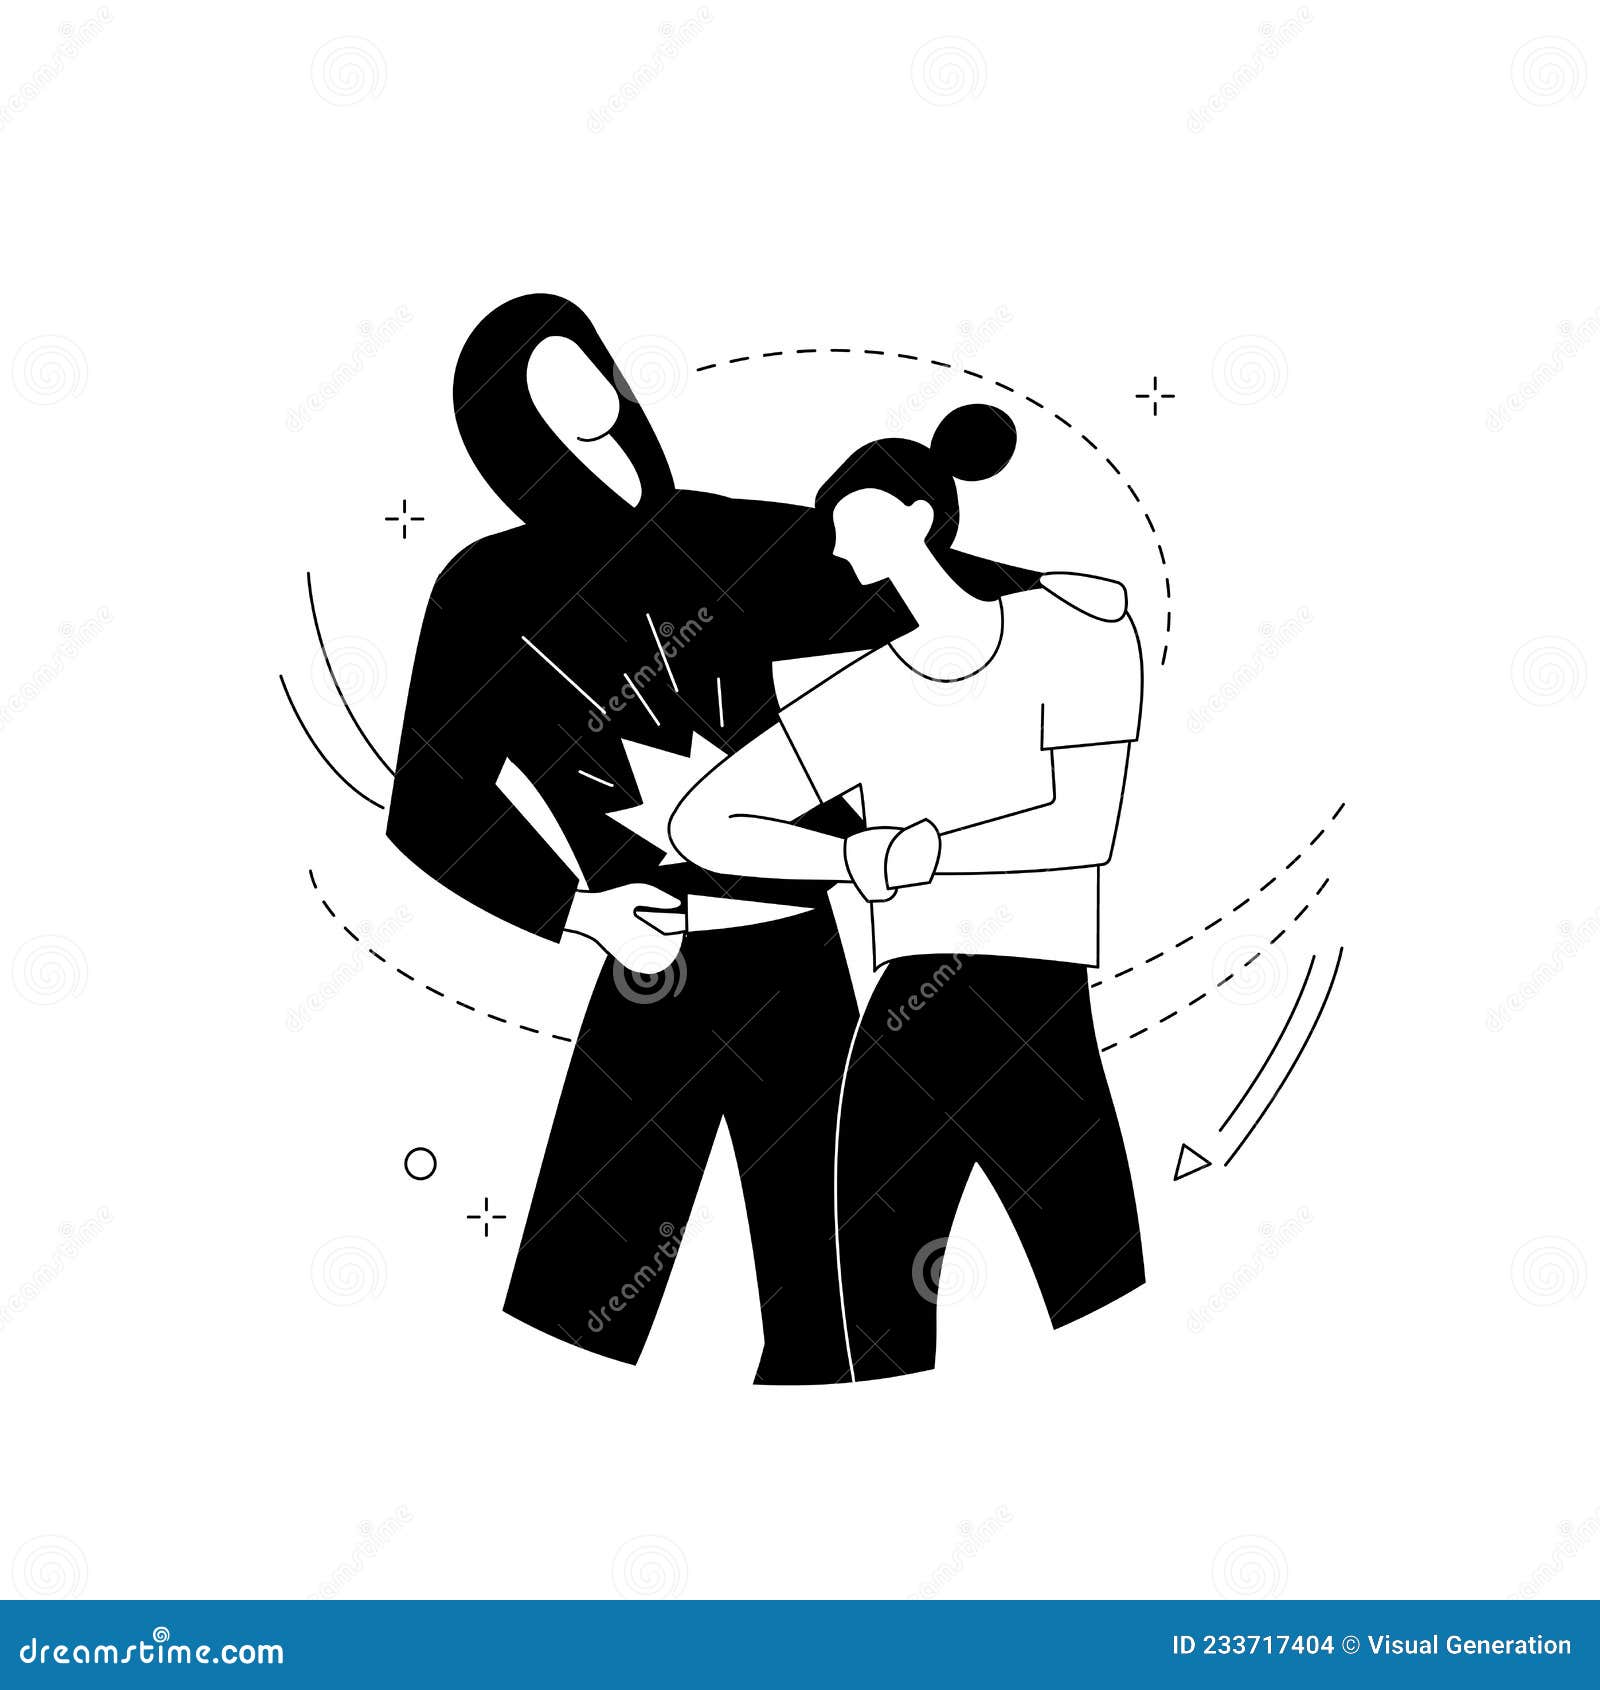 Man self defense against aggressor with knife Vector Image